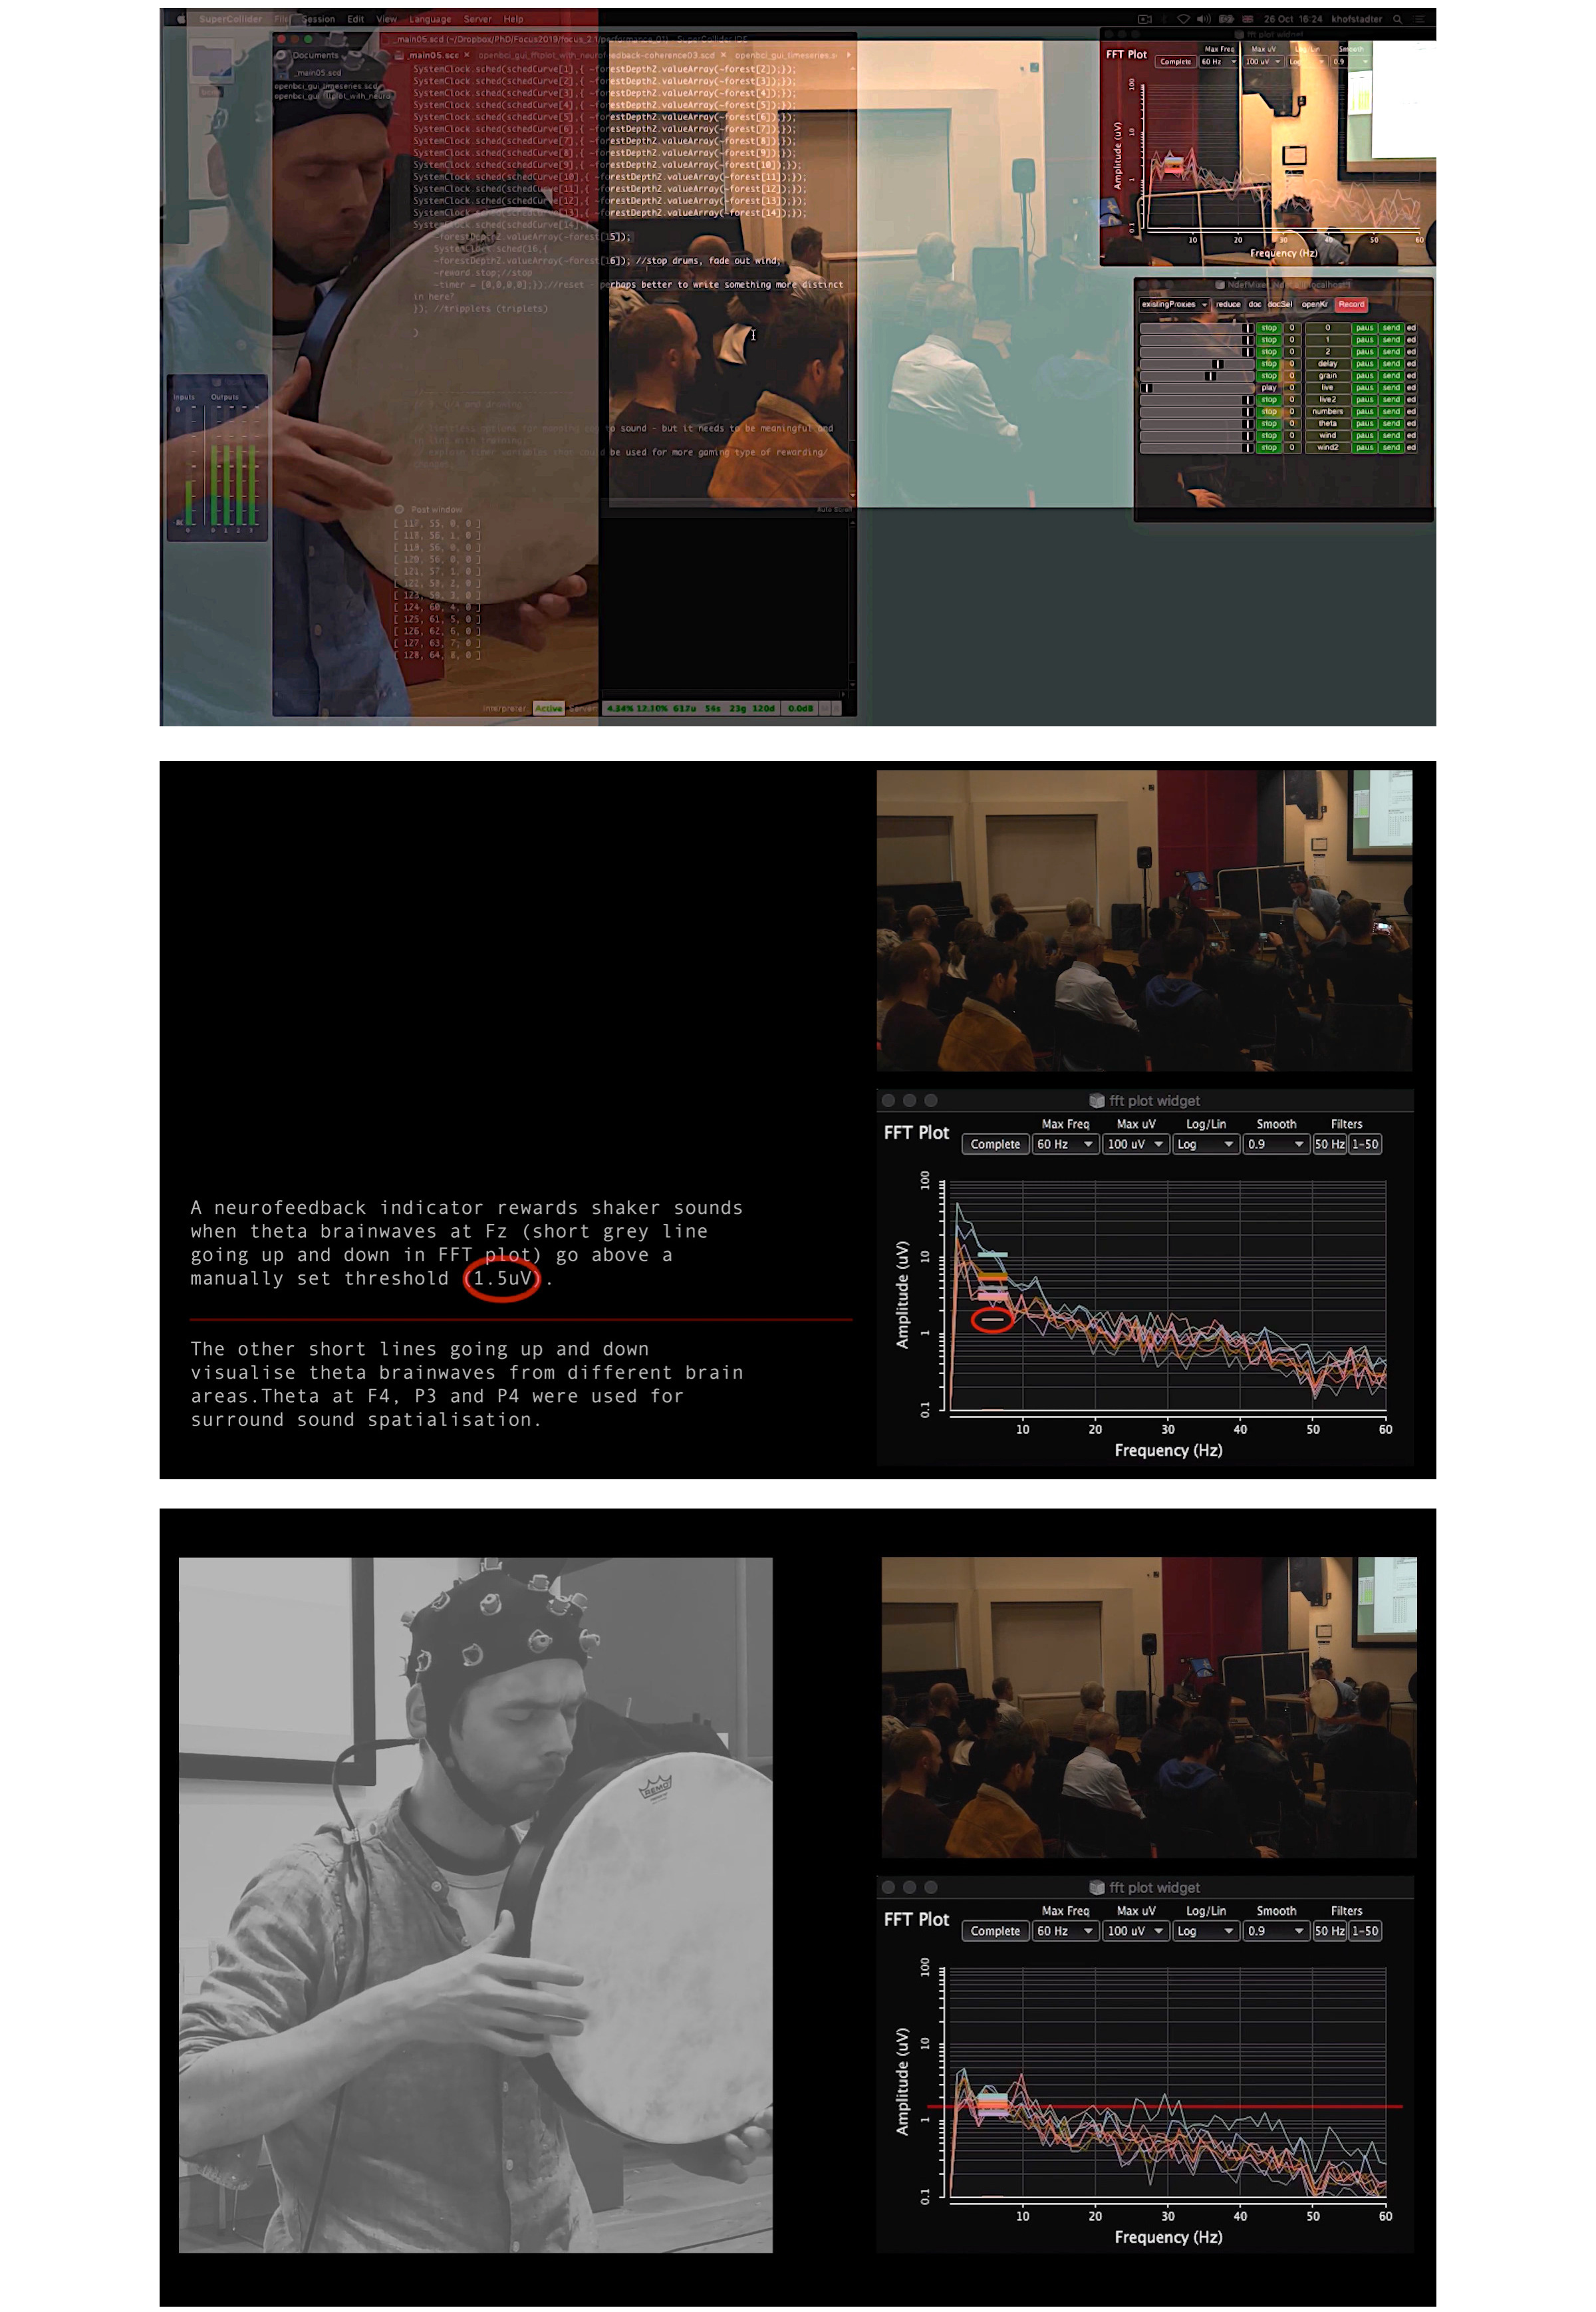 Snapshot (top) from the first performance video collage [@Hofstadter2019CambFestIdeas]. Snapshots from the second video, in which, between 0:51 and 2:10 minutes, a clear FFT plot and annotations clarify how the neurofeedback protocol uses theta at Fz to trigger shaker sounds (middle), and then a more minimal arrangement of video elements carries on documenting the event (bottom) [@Hofstadter2022CamFestIVideoBinBeats].